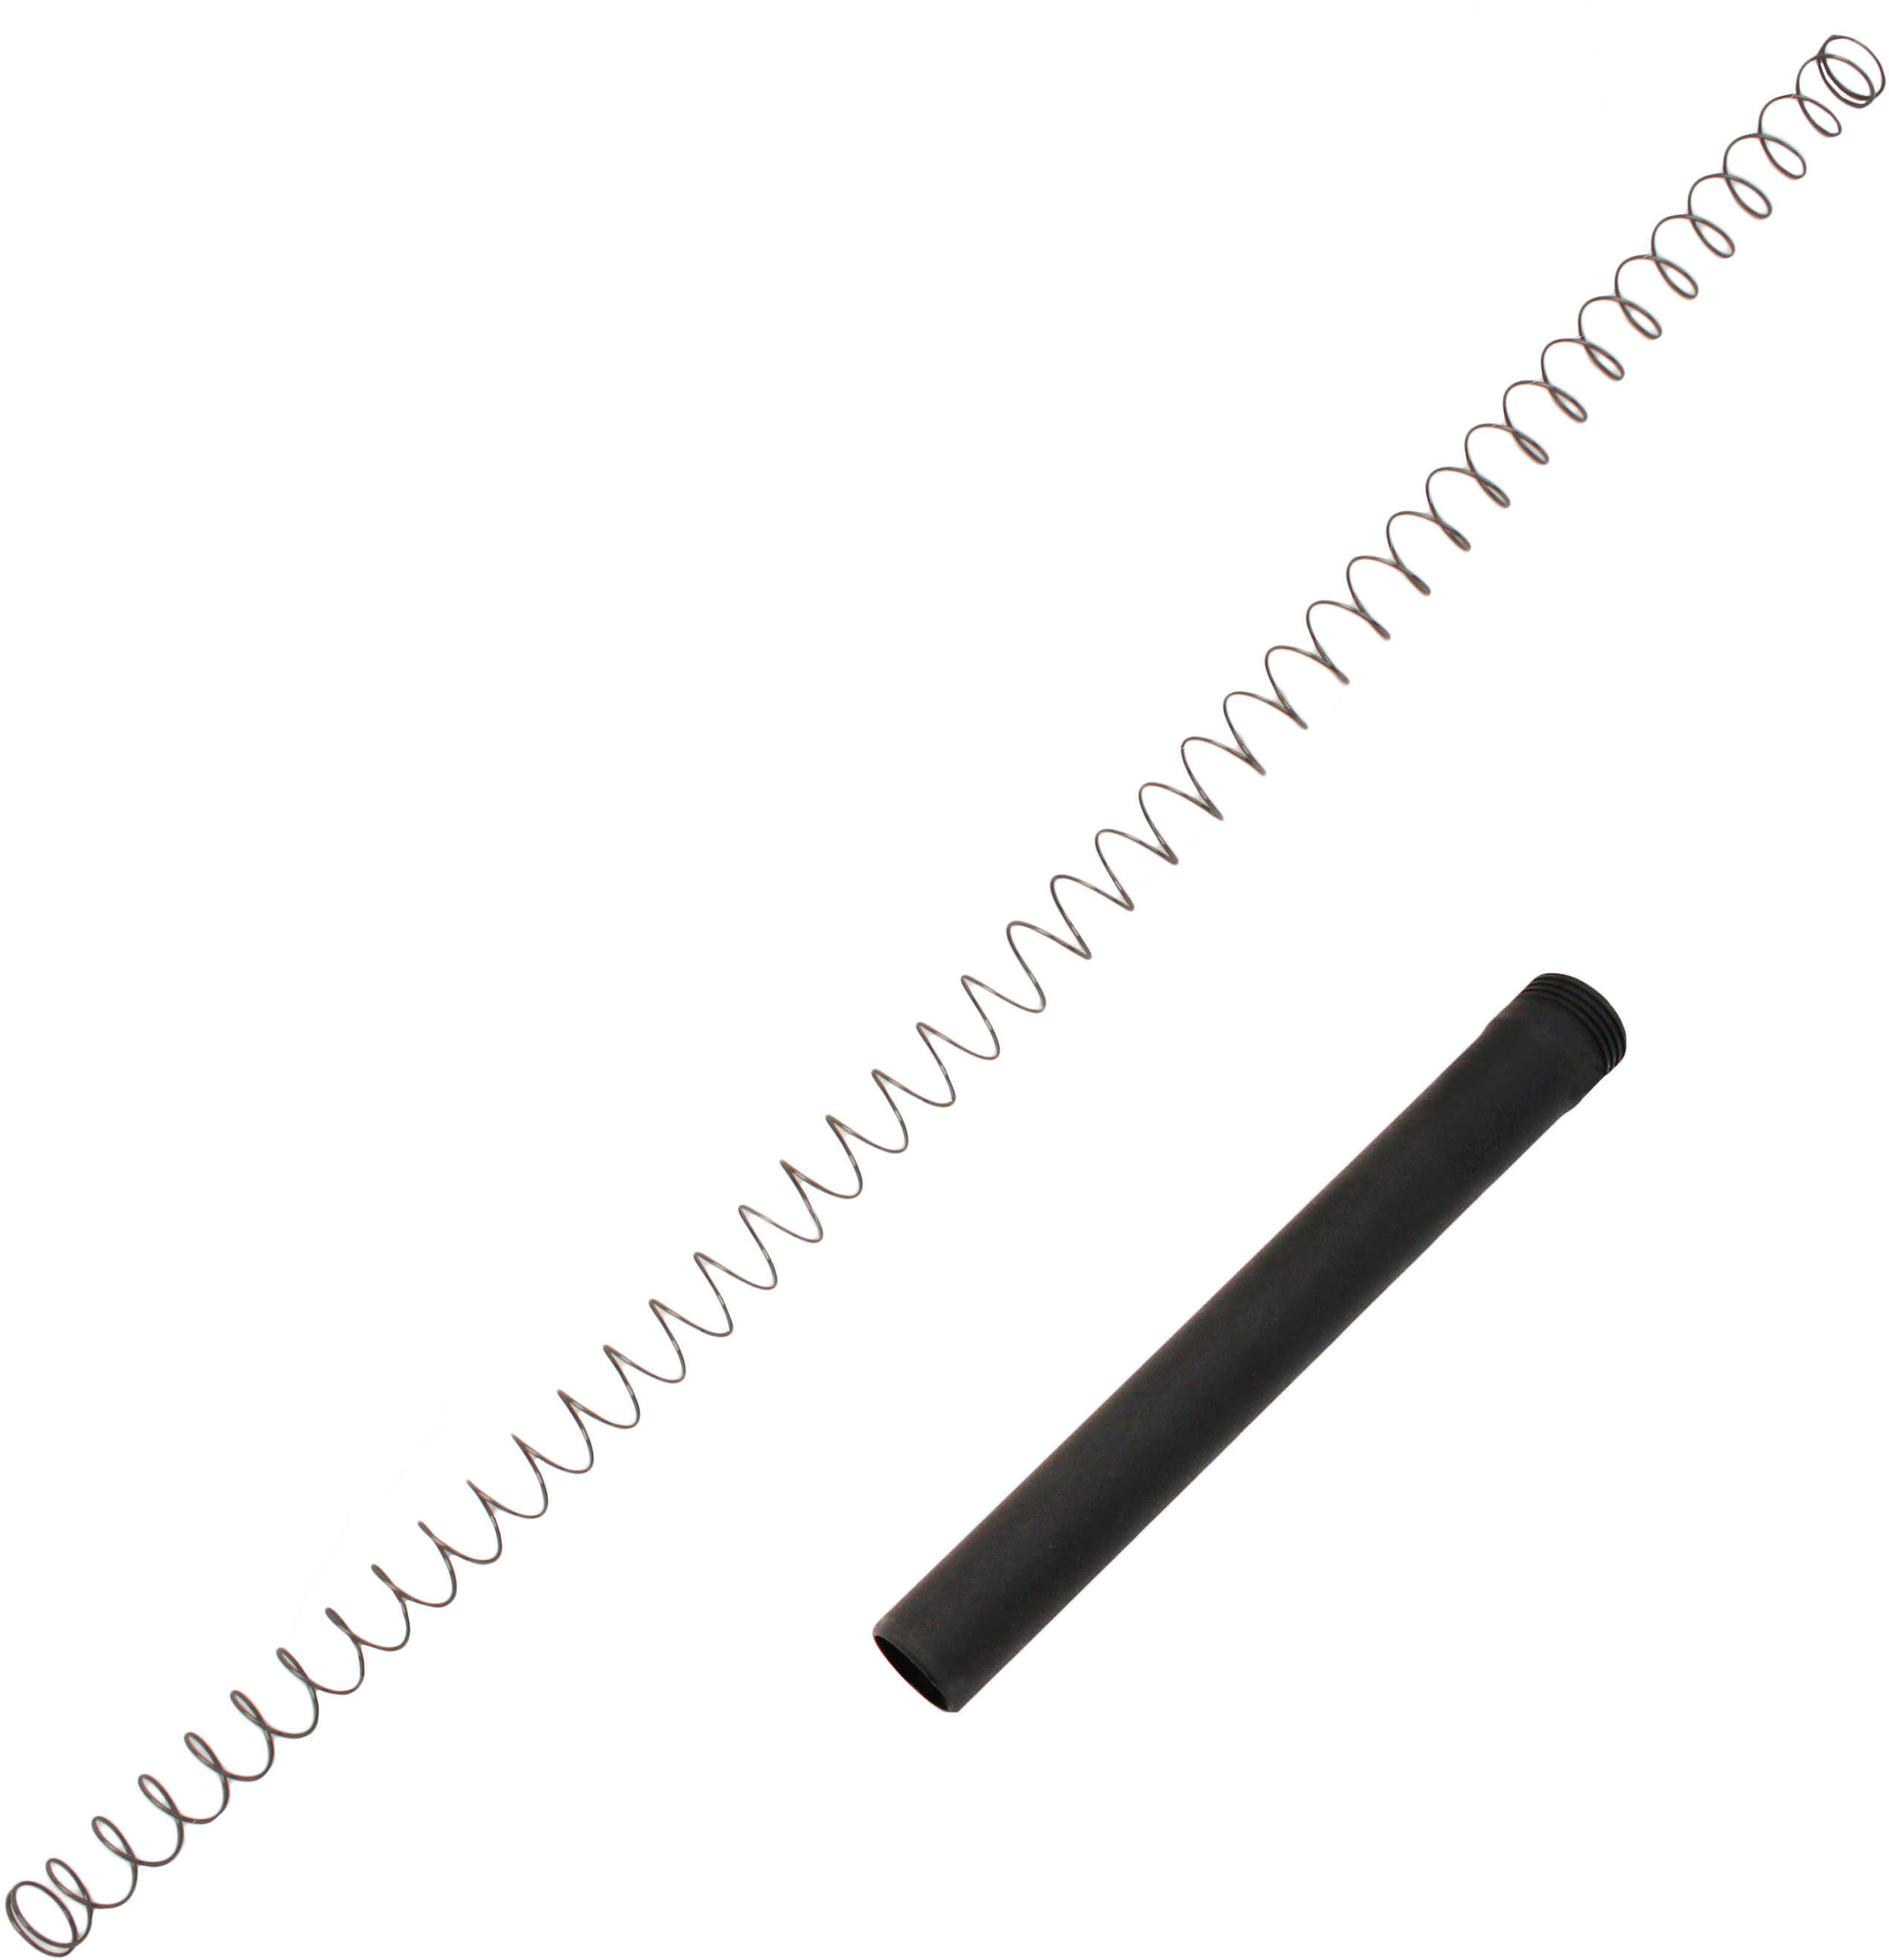 Pachmayr TacStar 7 Round Black Magazine Extension For Benelli Nova 12 Gauge Md: 1081188